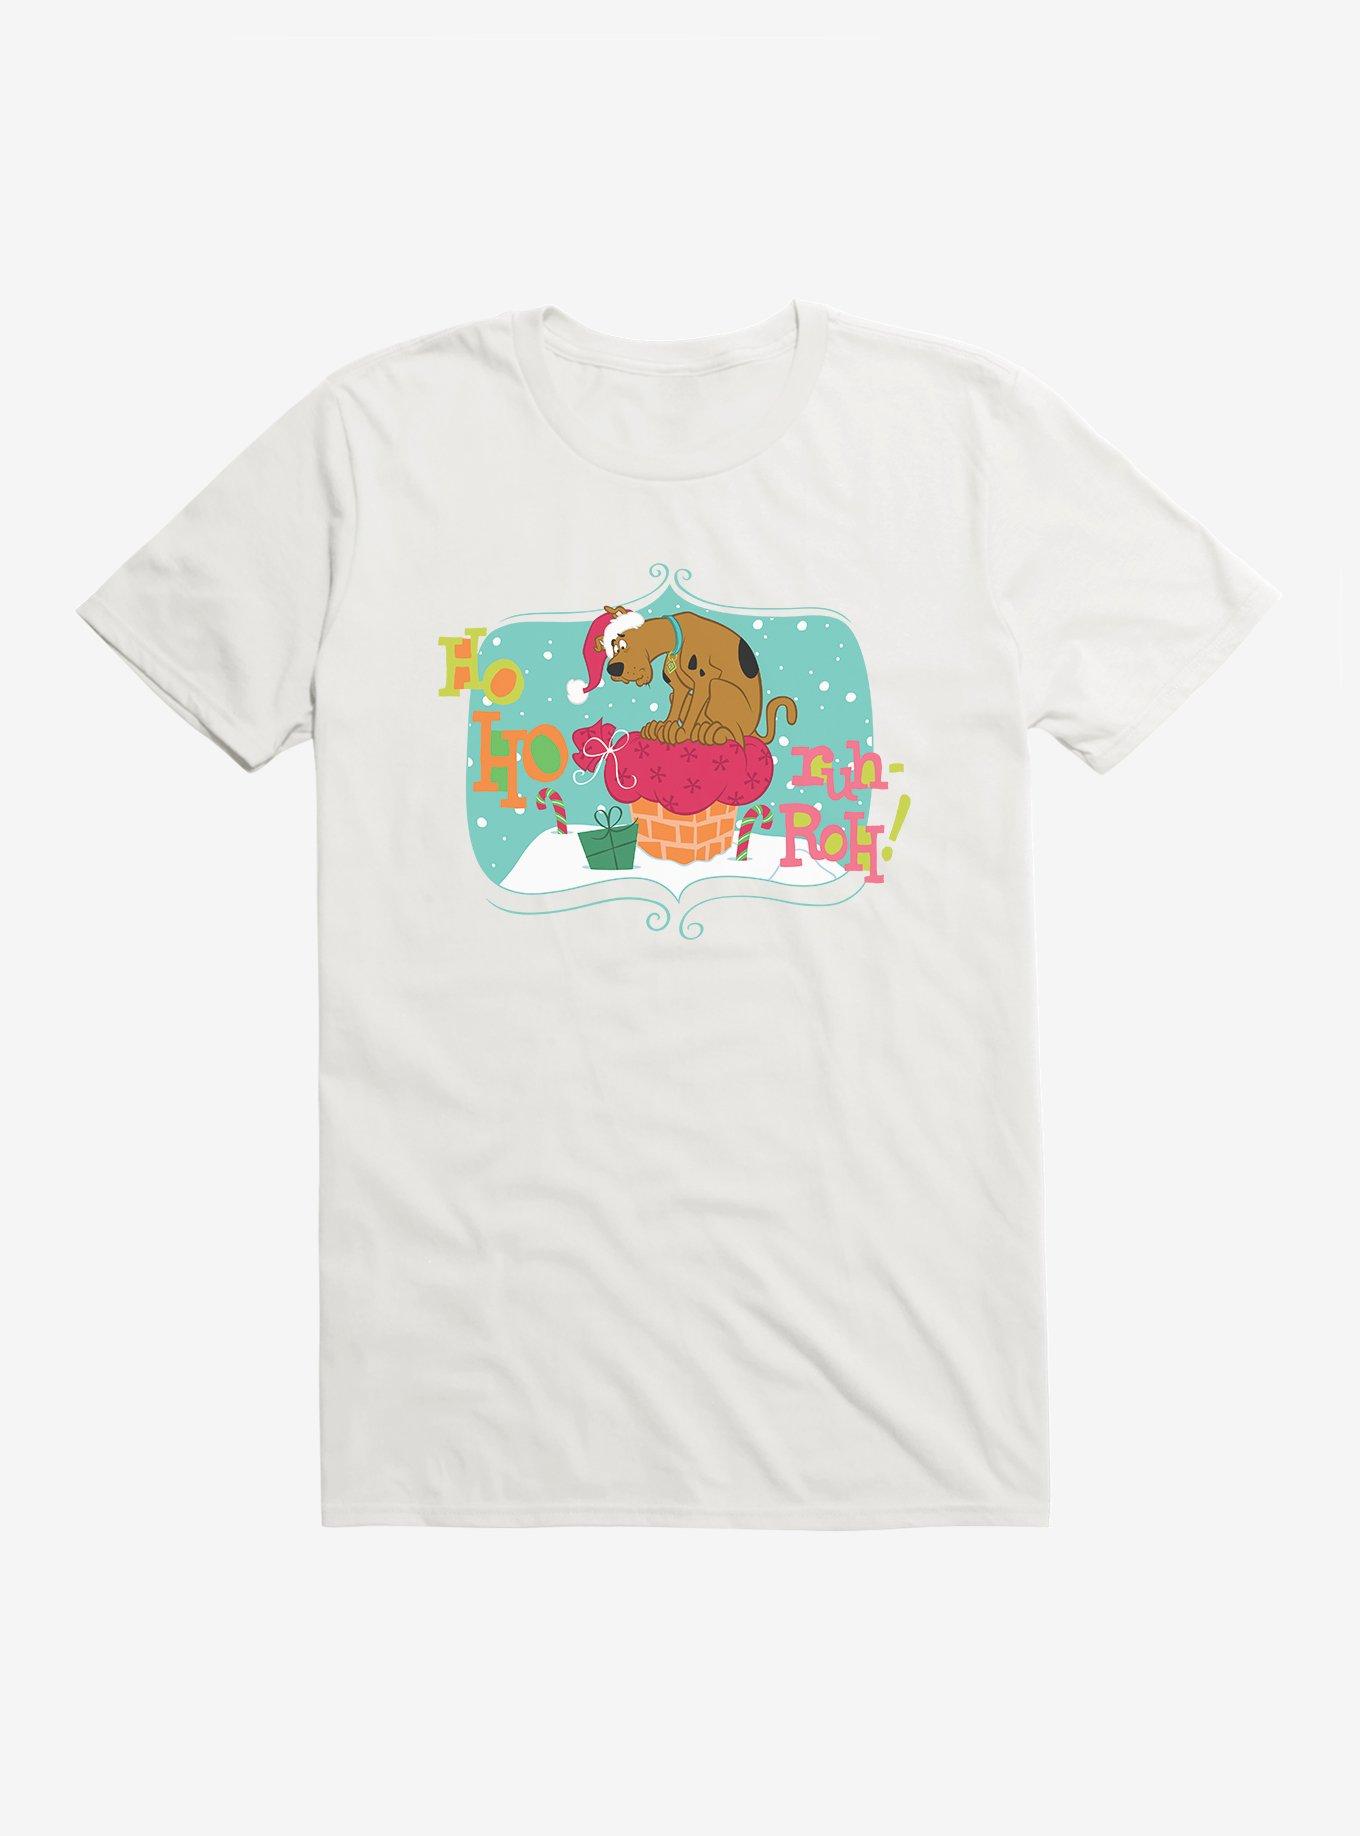 Scooby-Doo Stuck In The Chimney T-Shirt, WHITE, hi-res